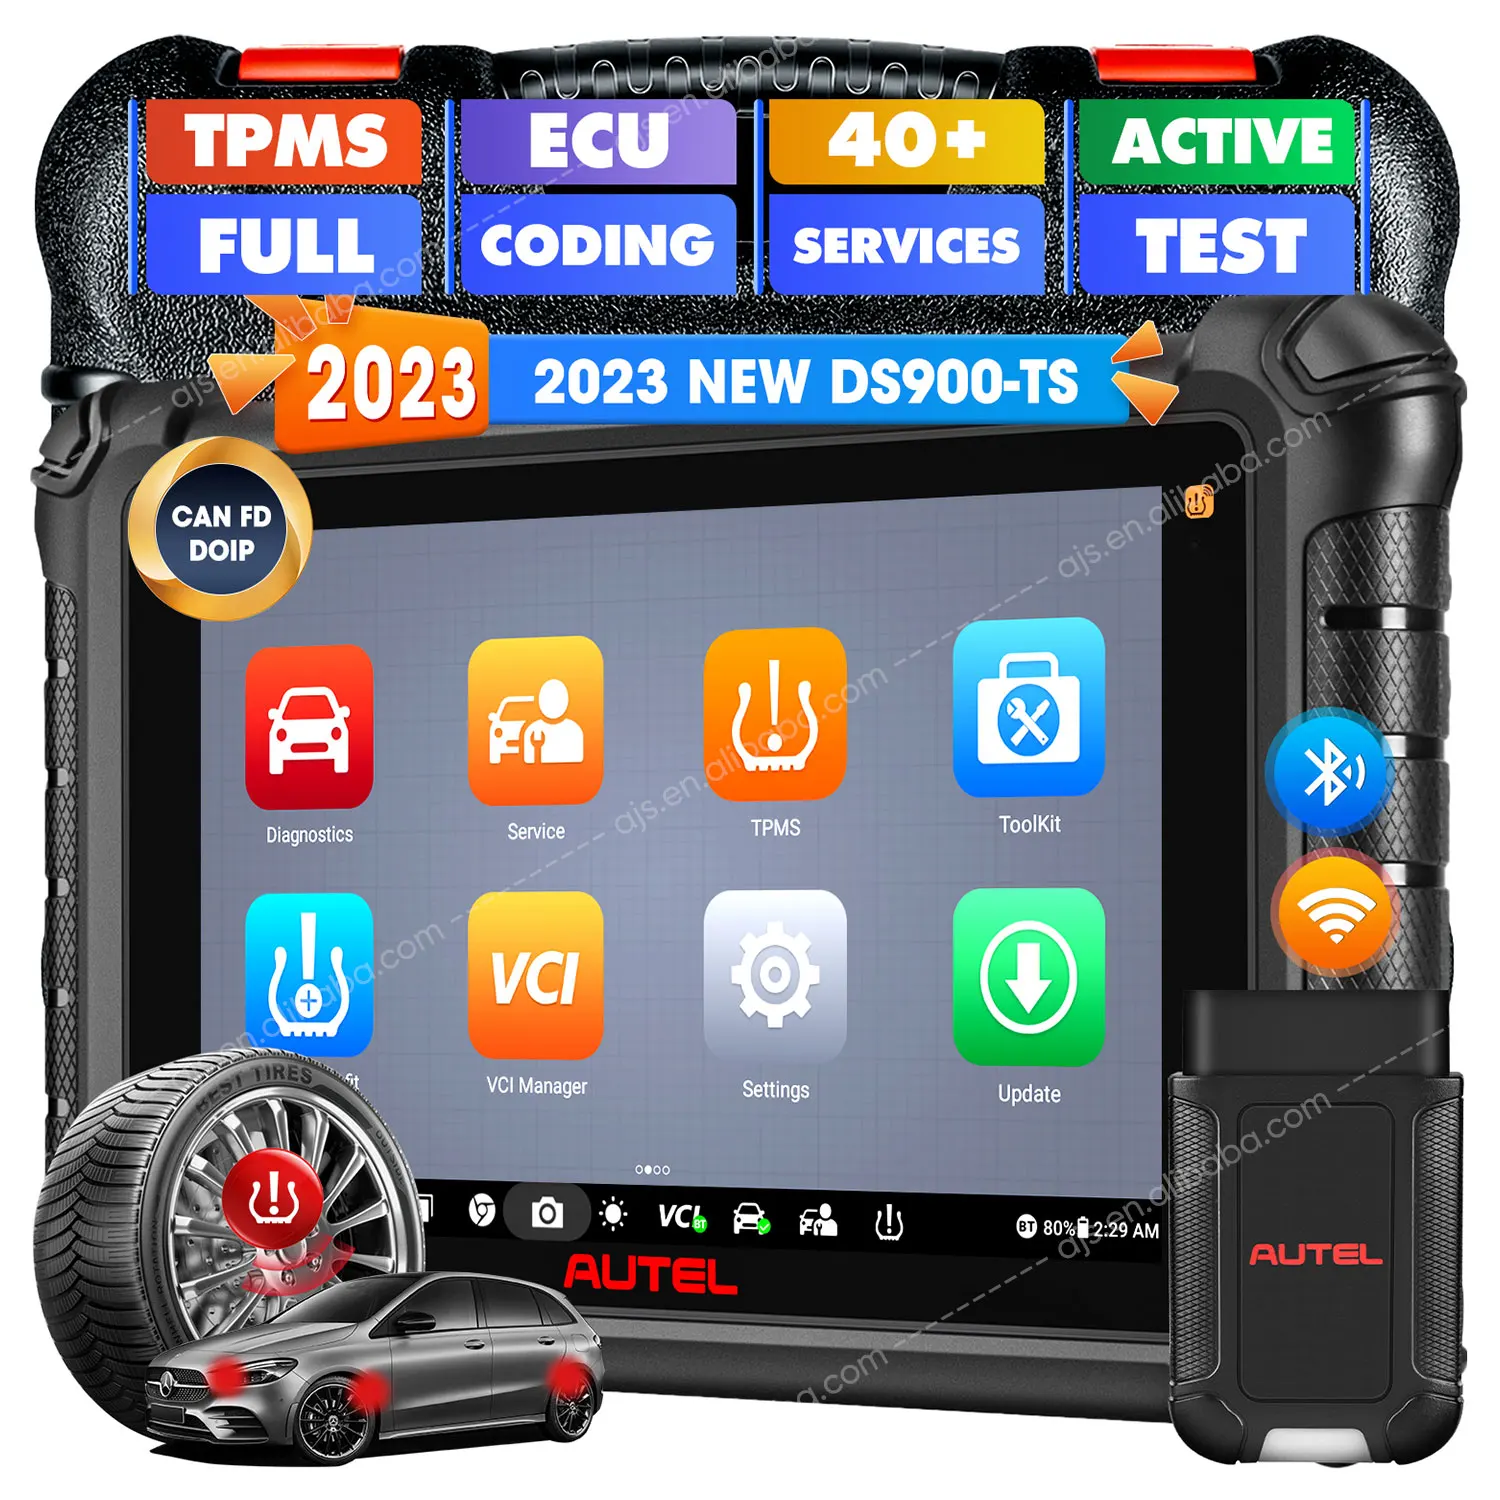 

Autel MaxiDAS DS900 TS Vehicle OBD2 Full System Scanner Machine Professional Code Reader Universal DS808 Car Diagnostic Tools